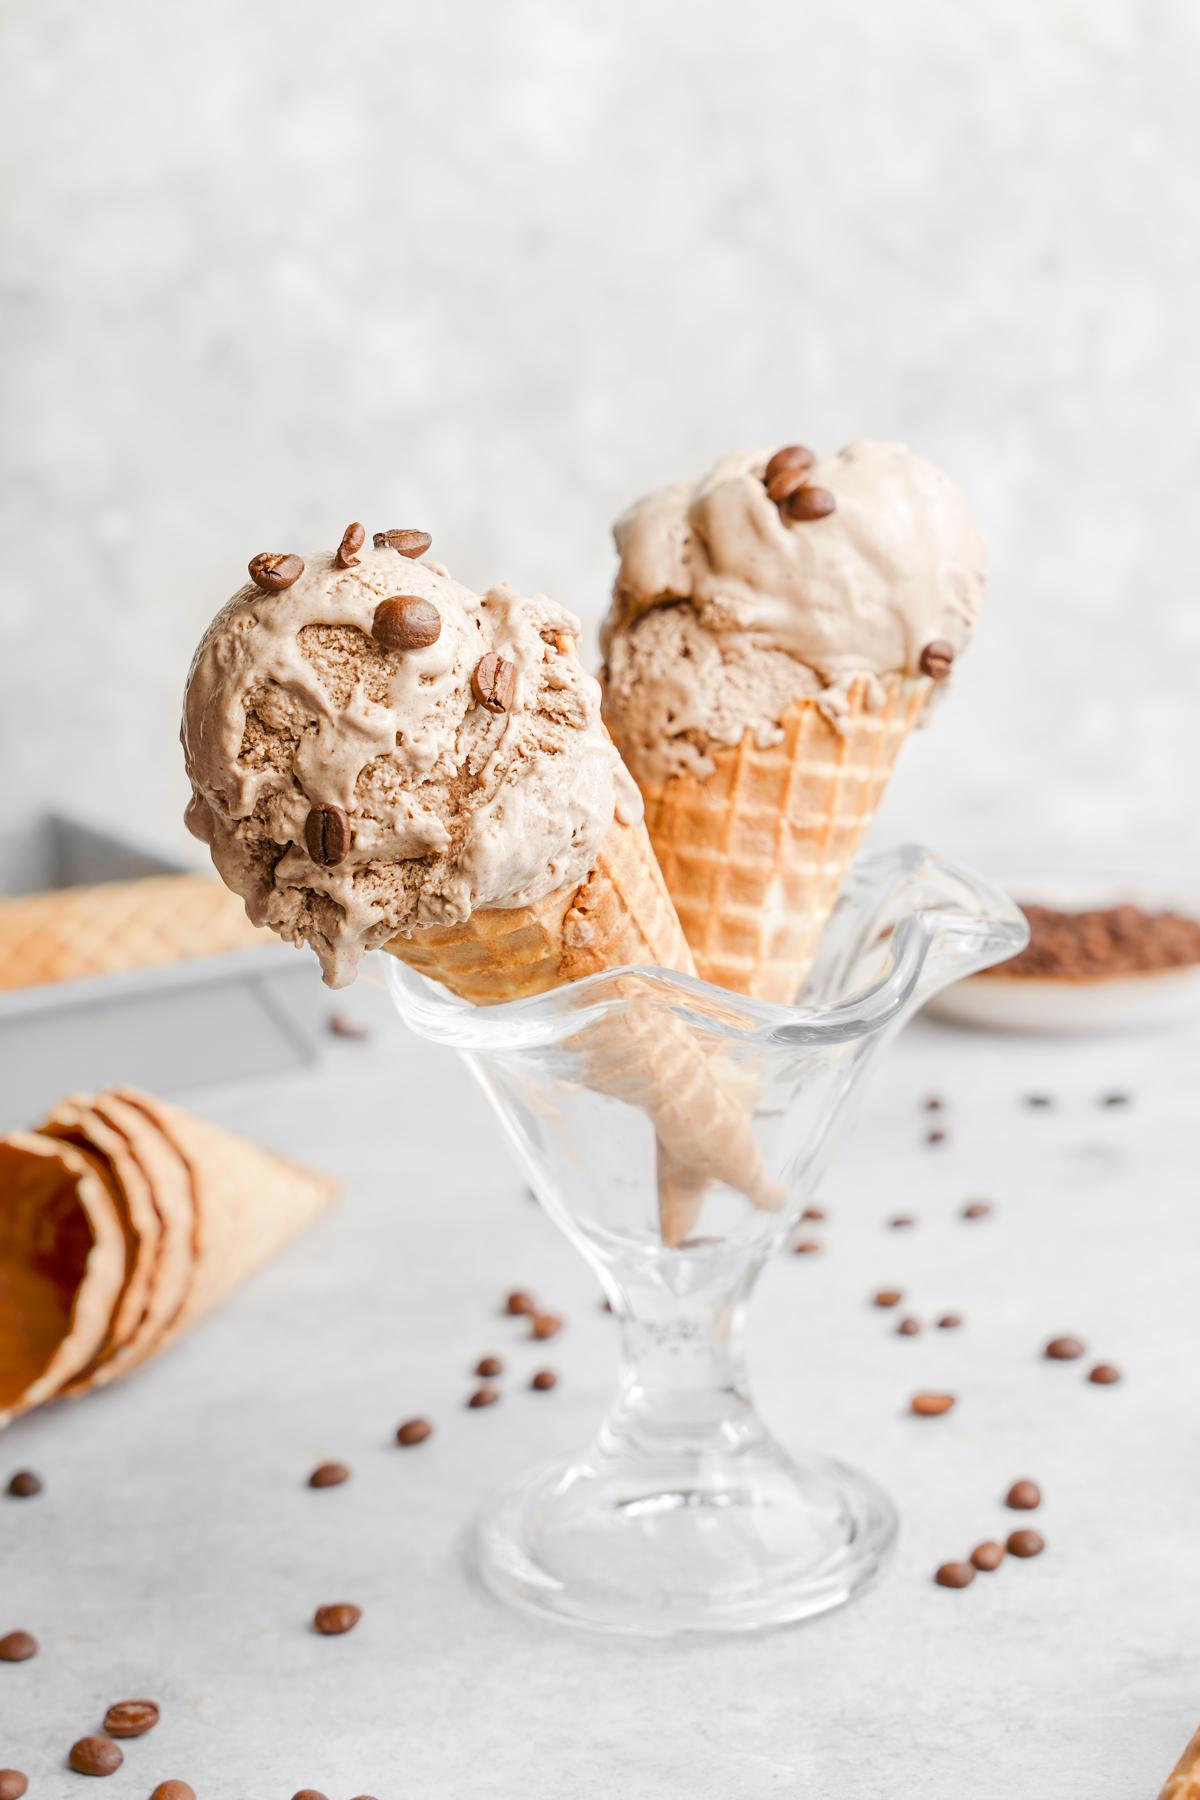 the vegan coffee ice cream with espresso beans on top of the scoops